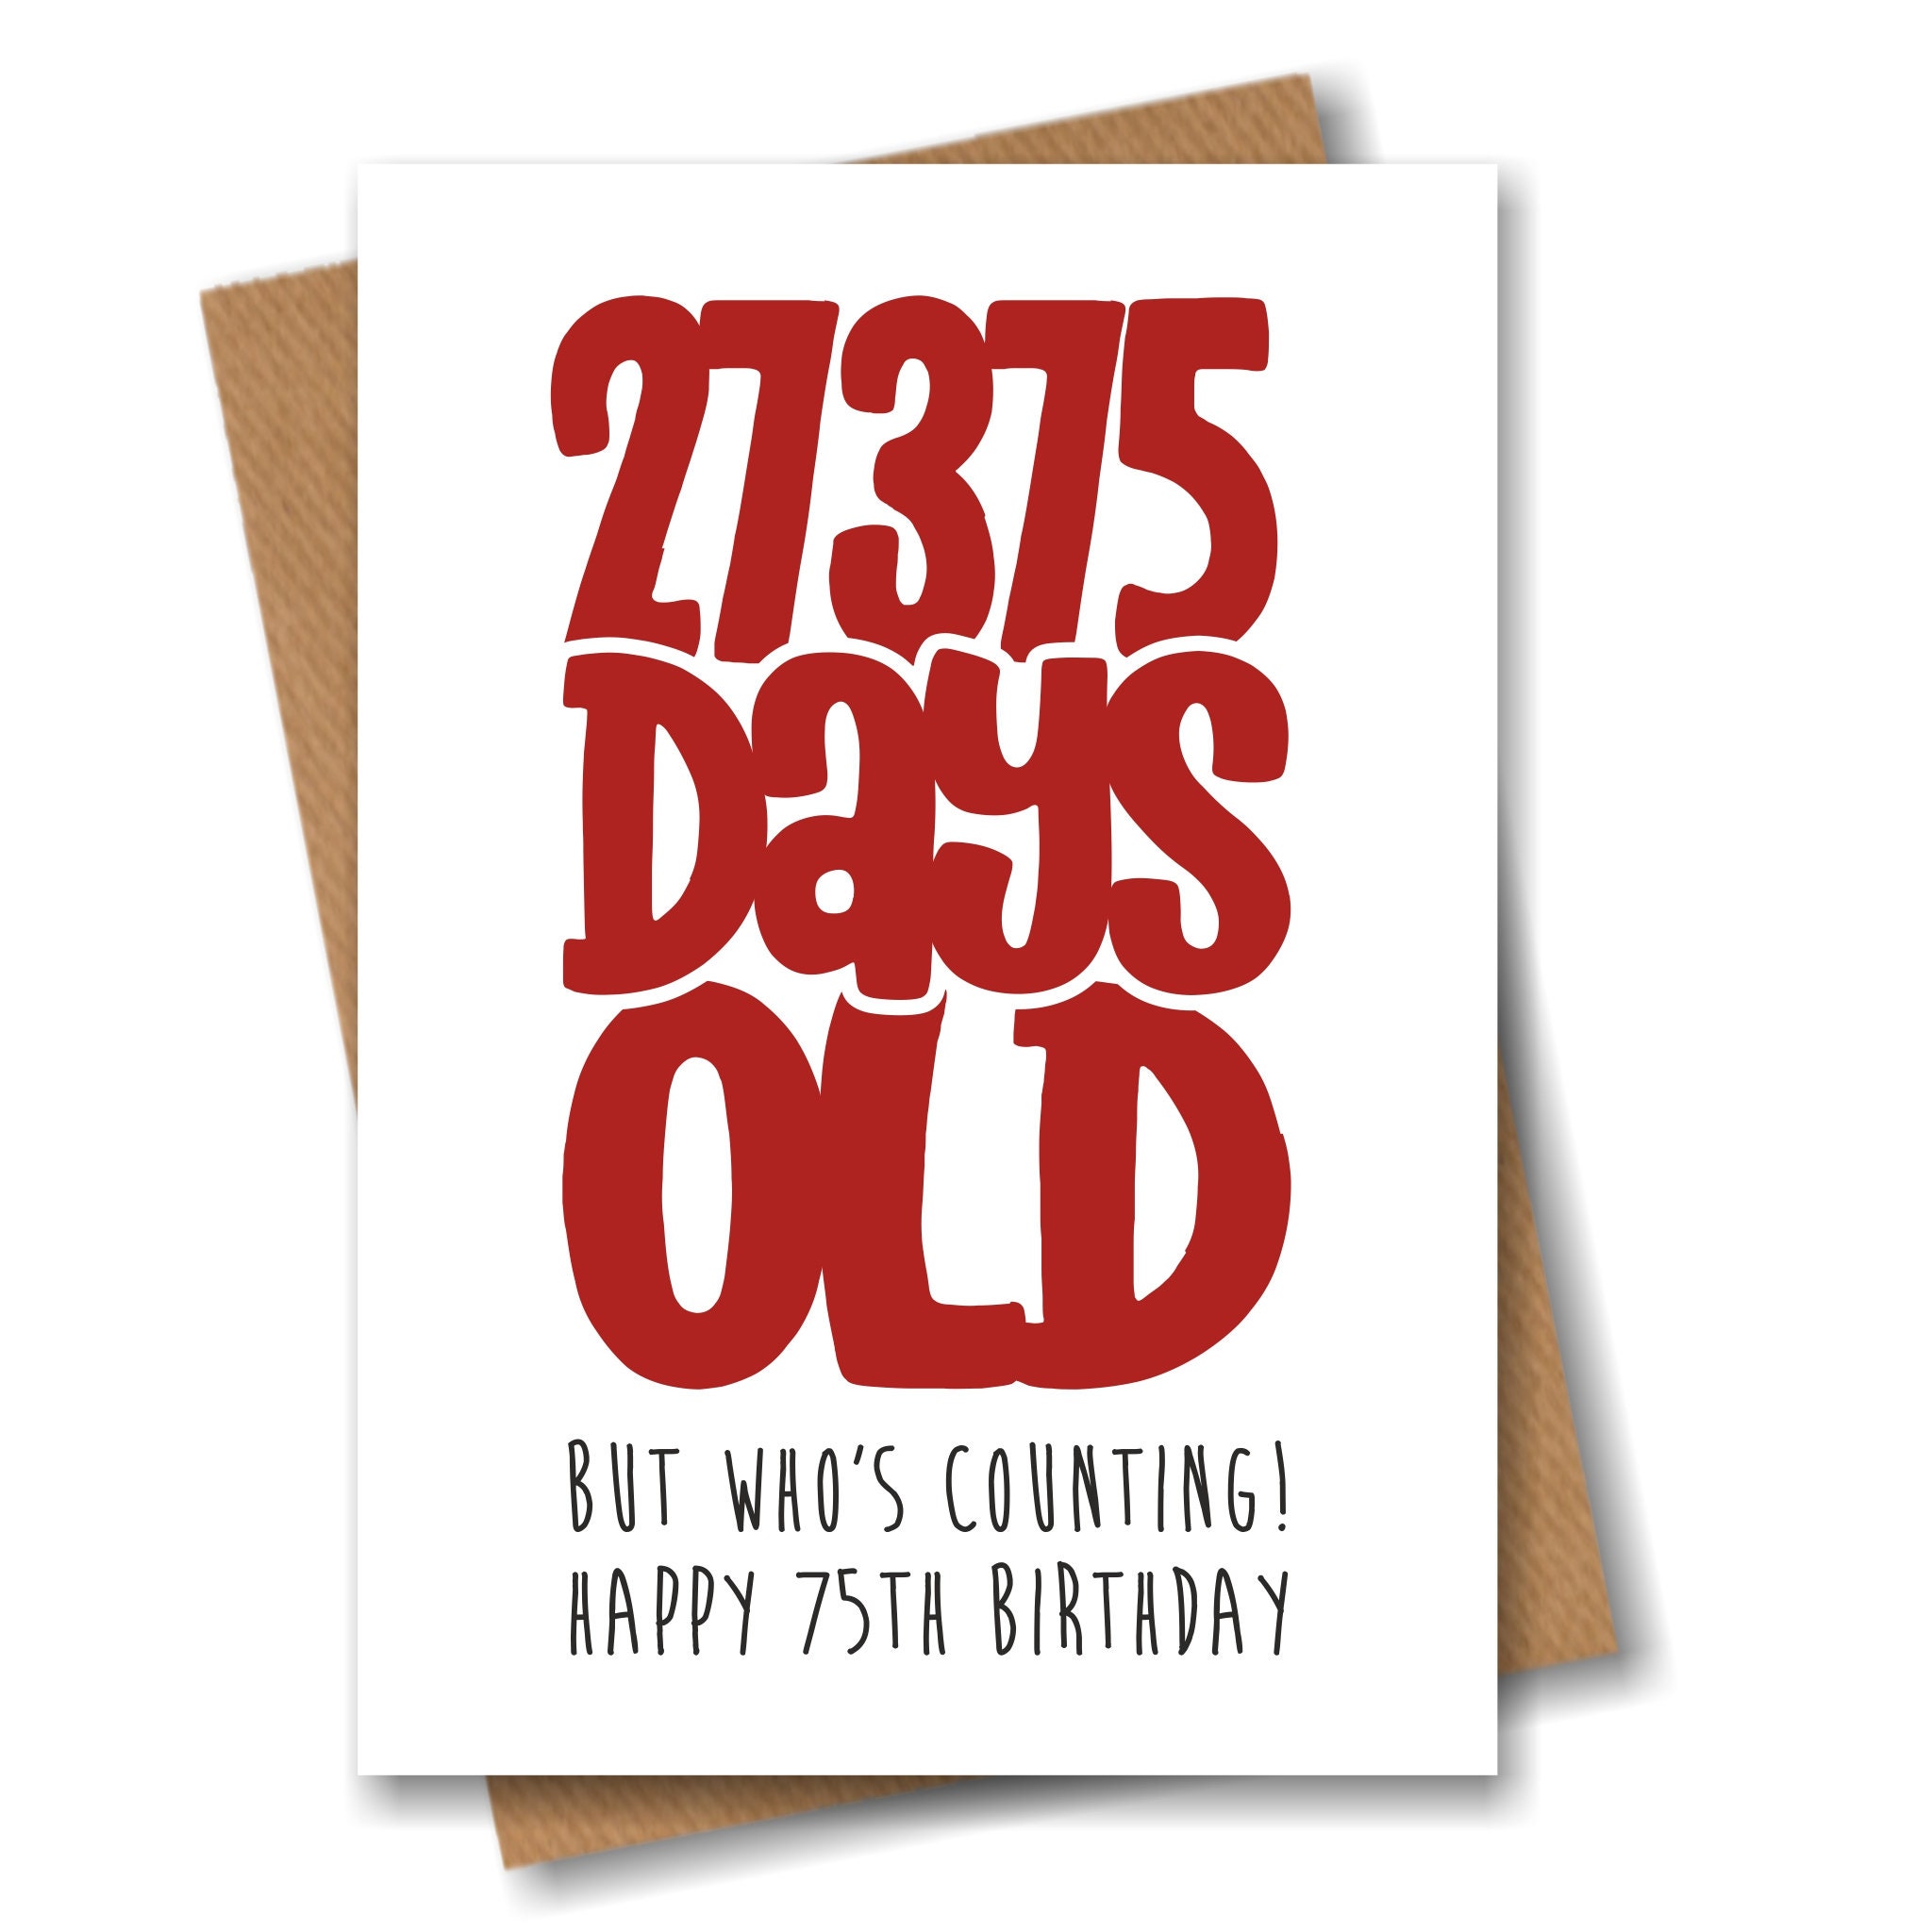 Funny 75th Birthday Card 27378 Days Old But Who's Etsy